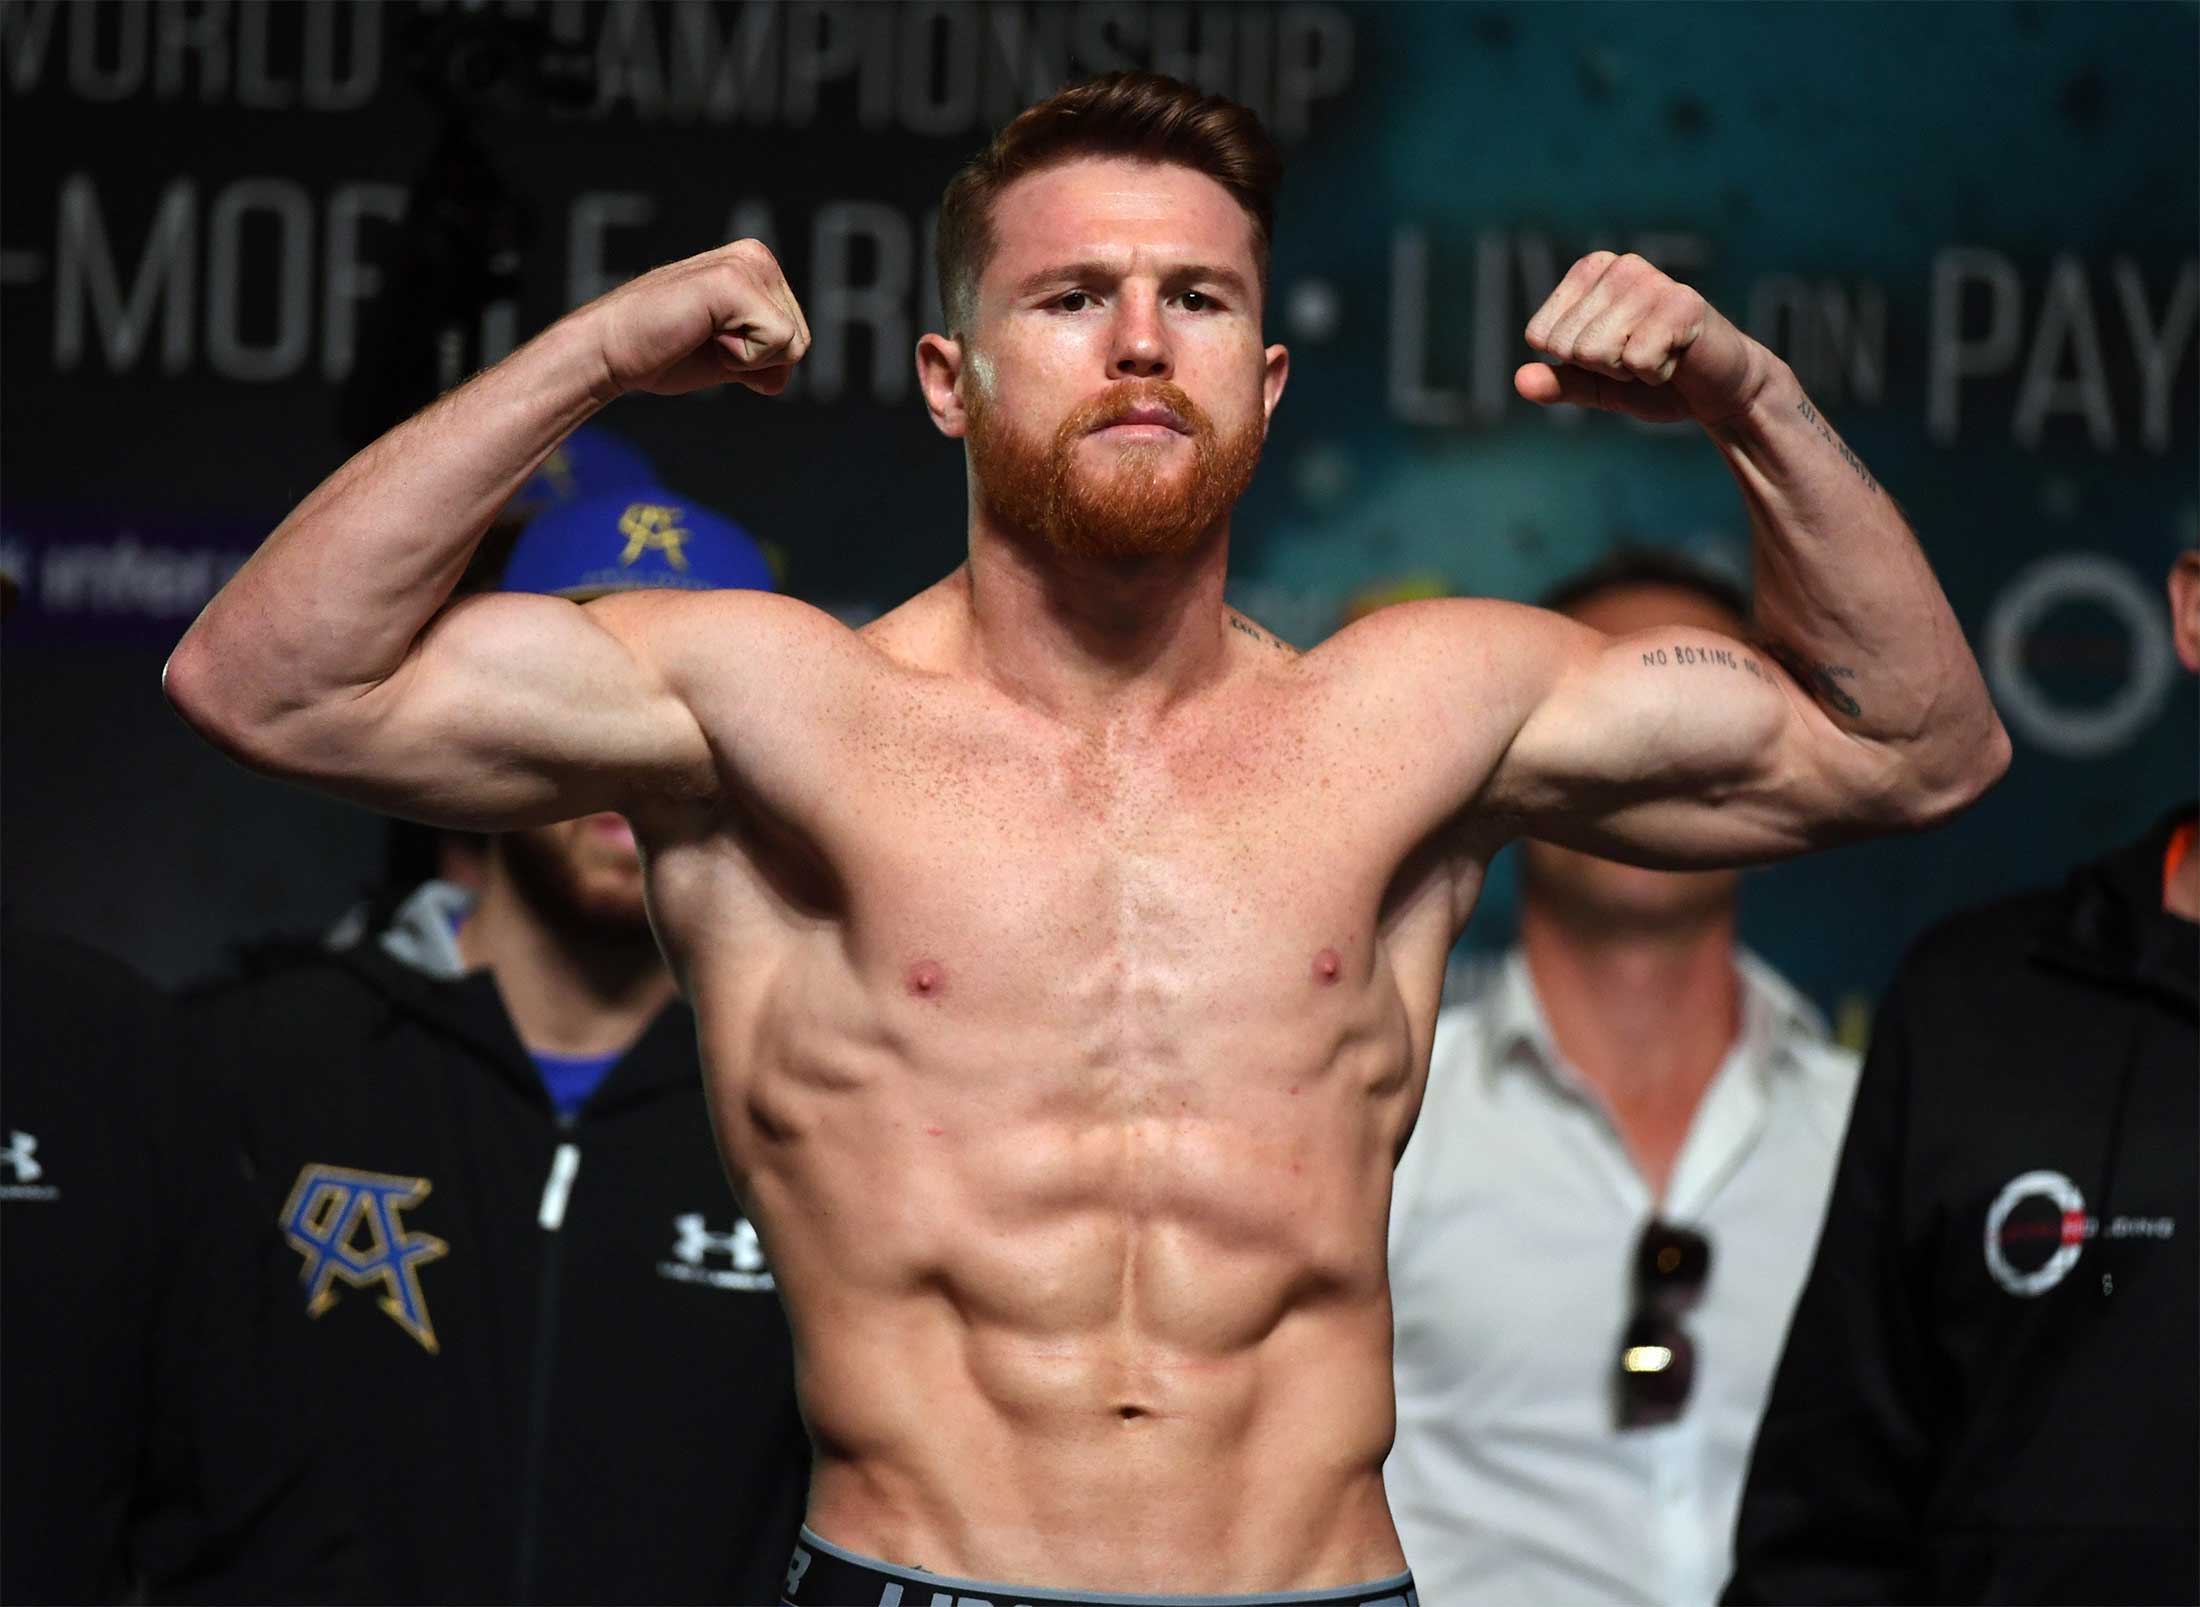 Heres how the face of boxing Canelo Alvarez spends his millions